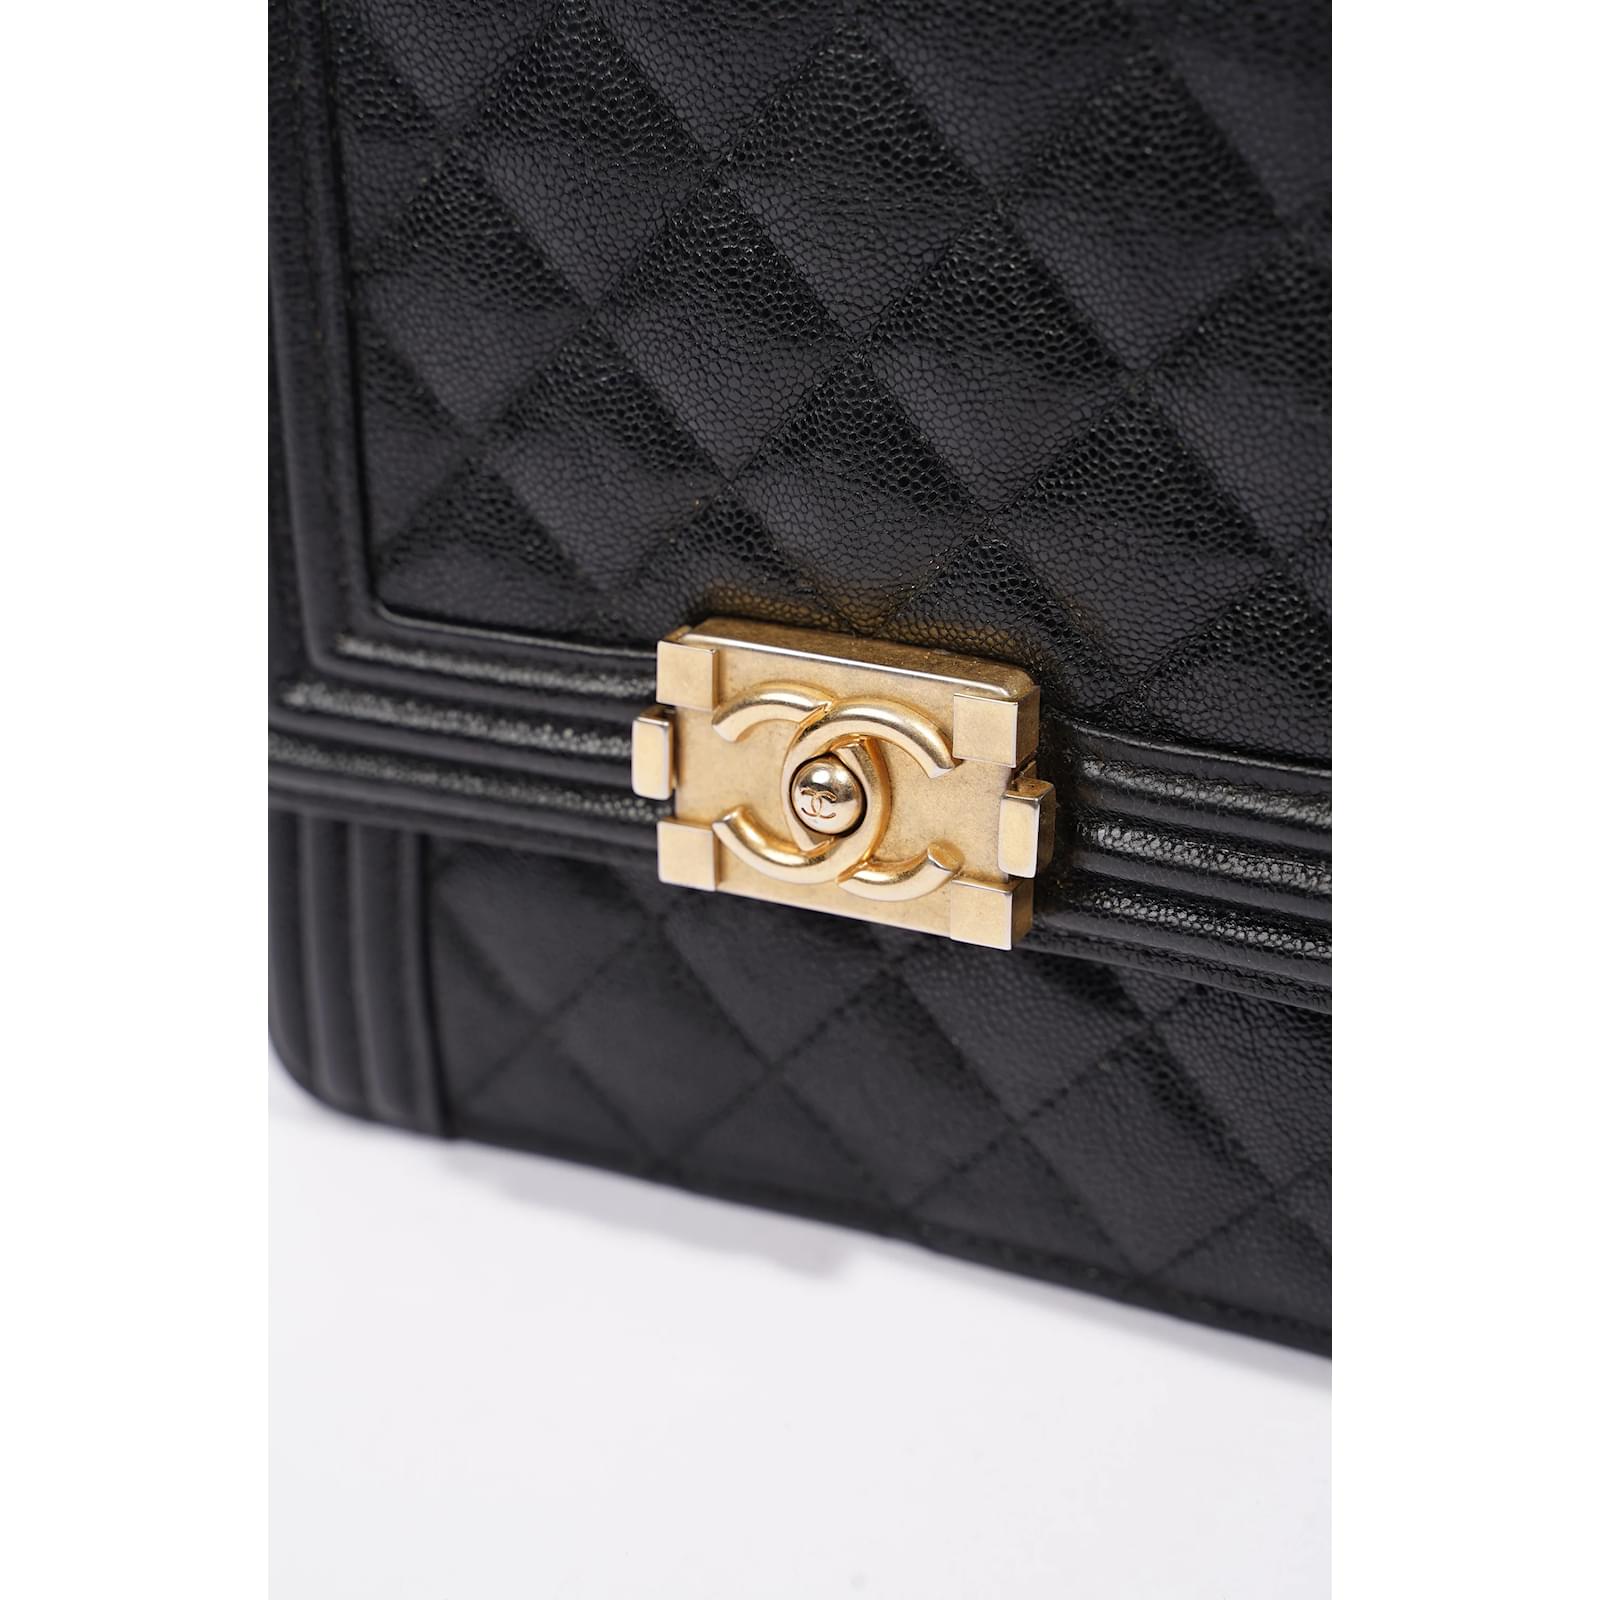 Chanel Black Chevron Quilted Caviar Old Medium Boy Bag Antique Gold Hardware, 2023 (Like New)